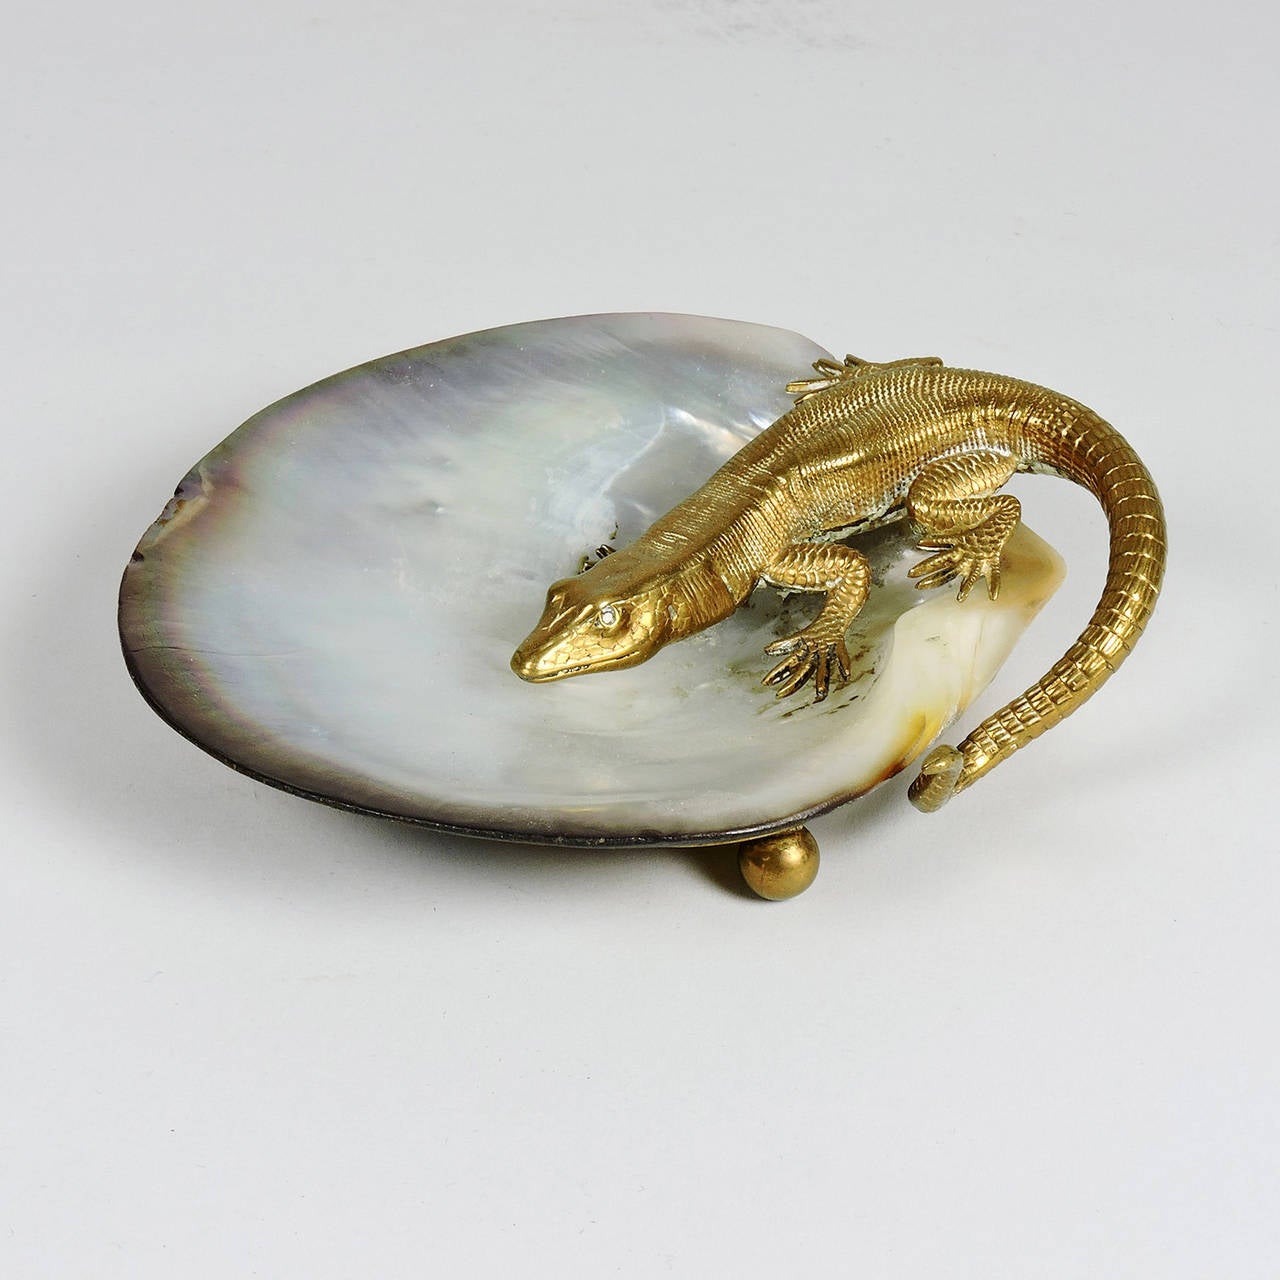 Antique brass or bronze salamander mounted on a mother-of-pearl lined shell on three bun feet. Dimensions: 1 1/2 x 5 x 4 3/4 inches.